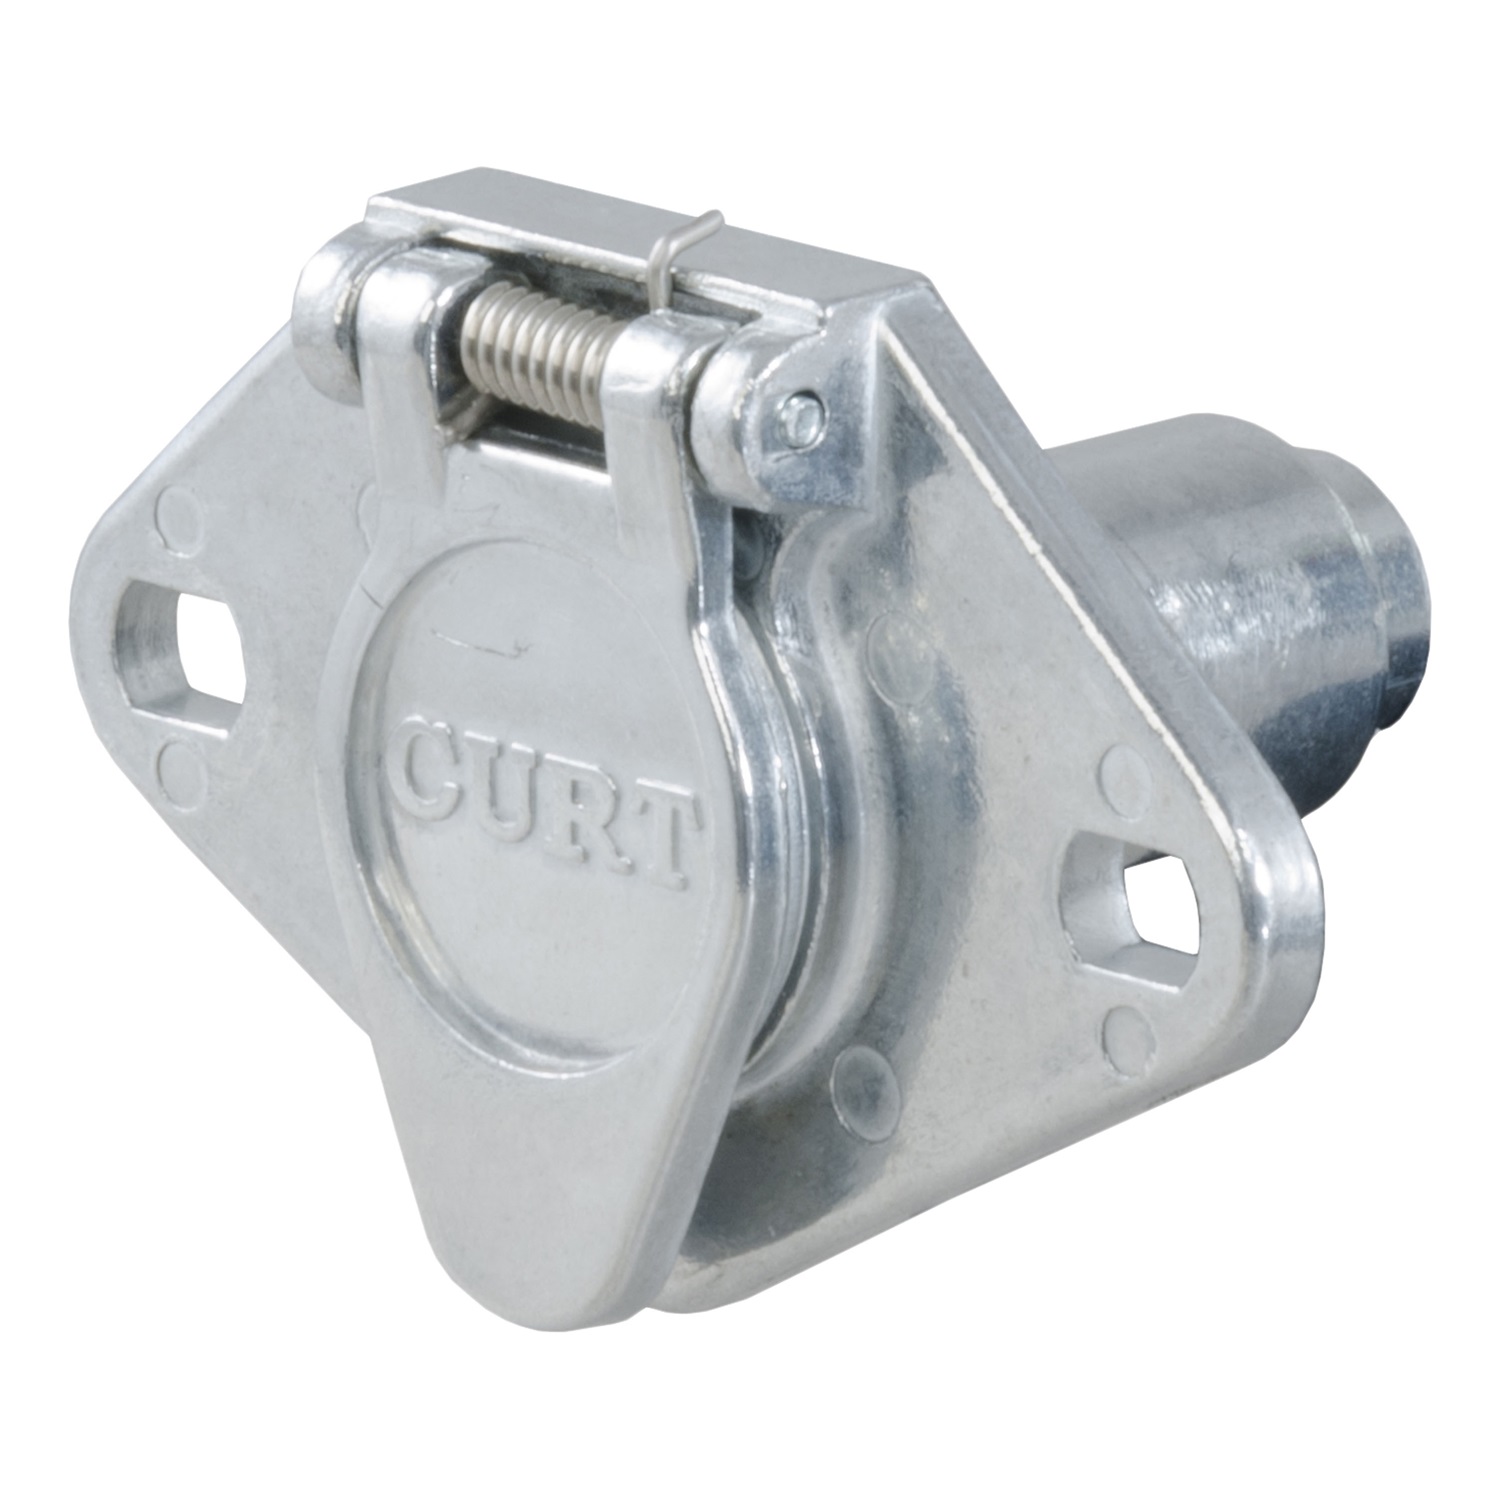 CURT Manufacturing CURT Manufacturing 58090 6-Way Round Connector  Fits